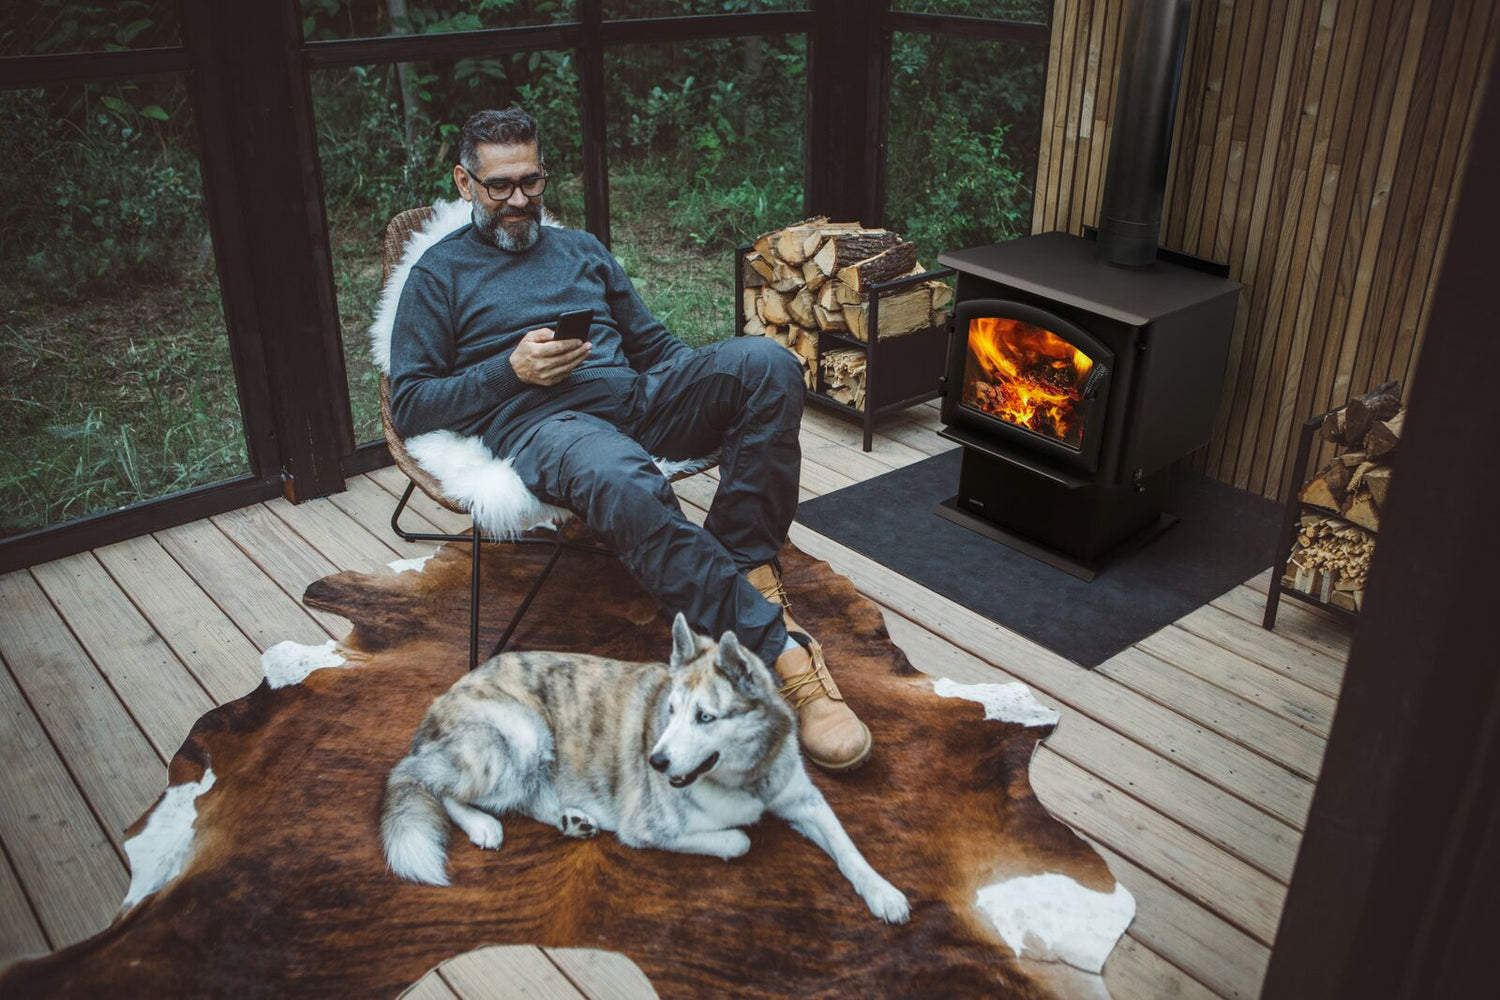 A man sitting near a wood stove with his dog on a porch